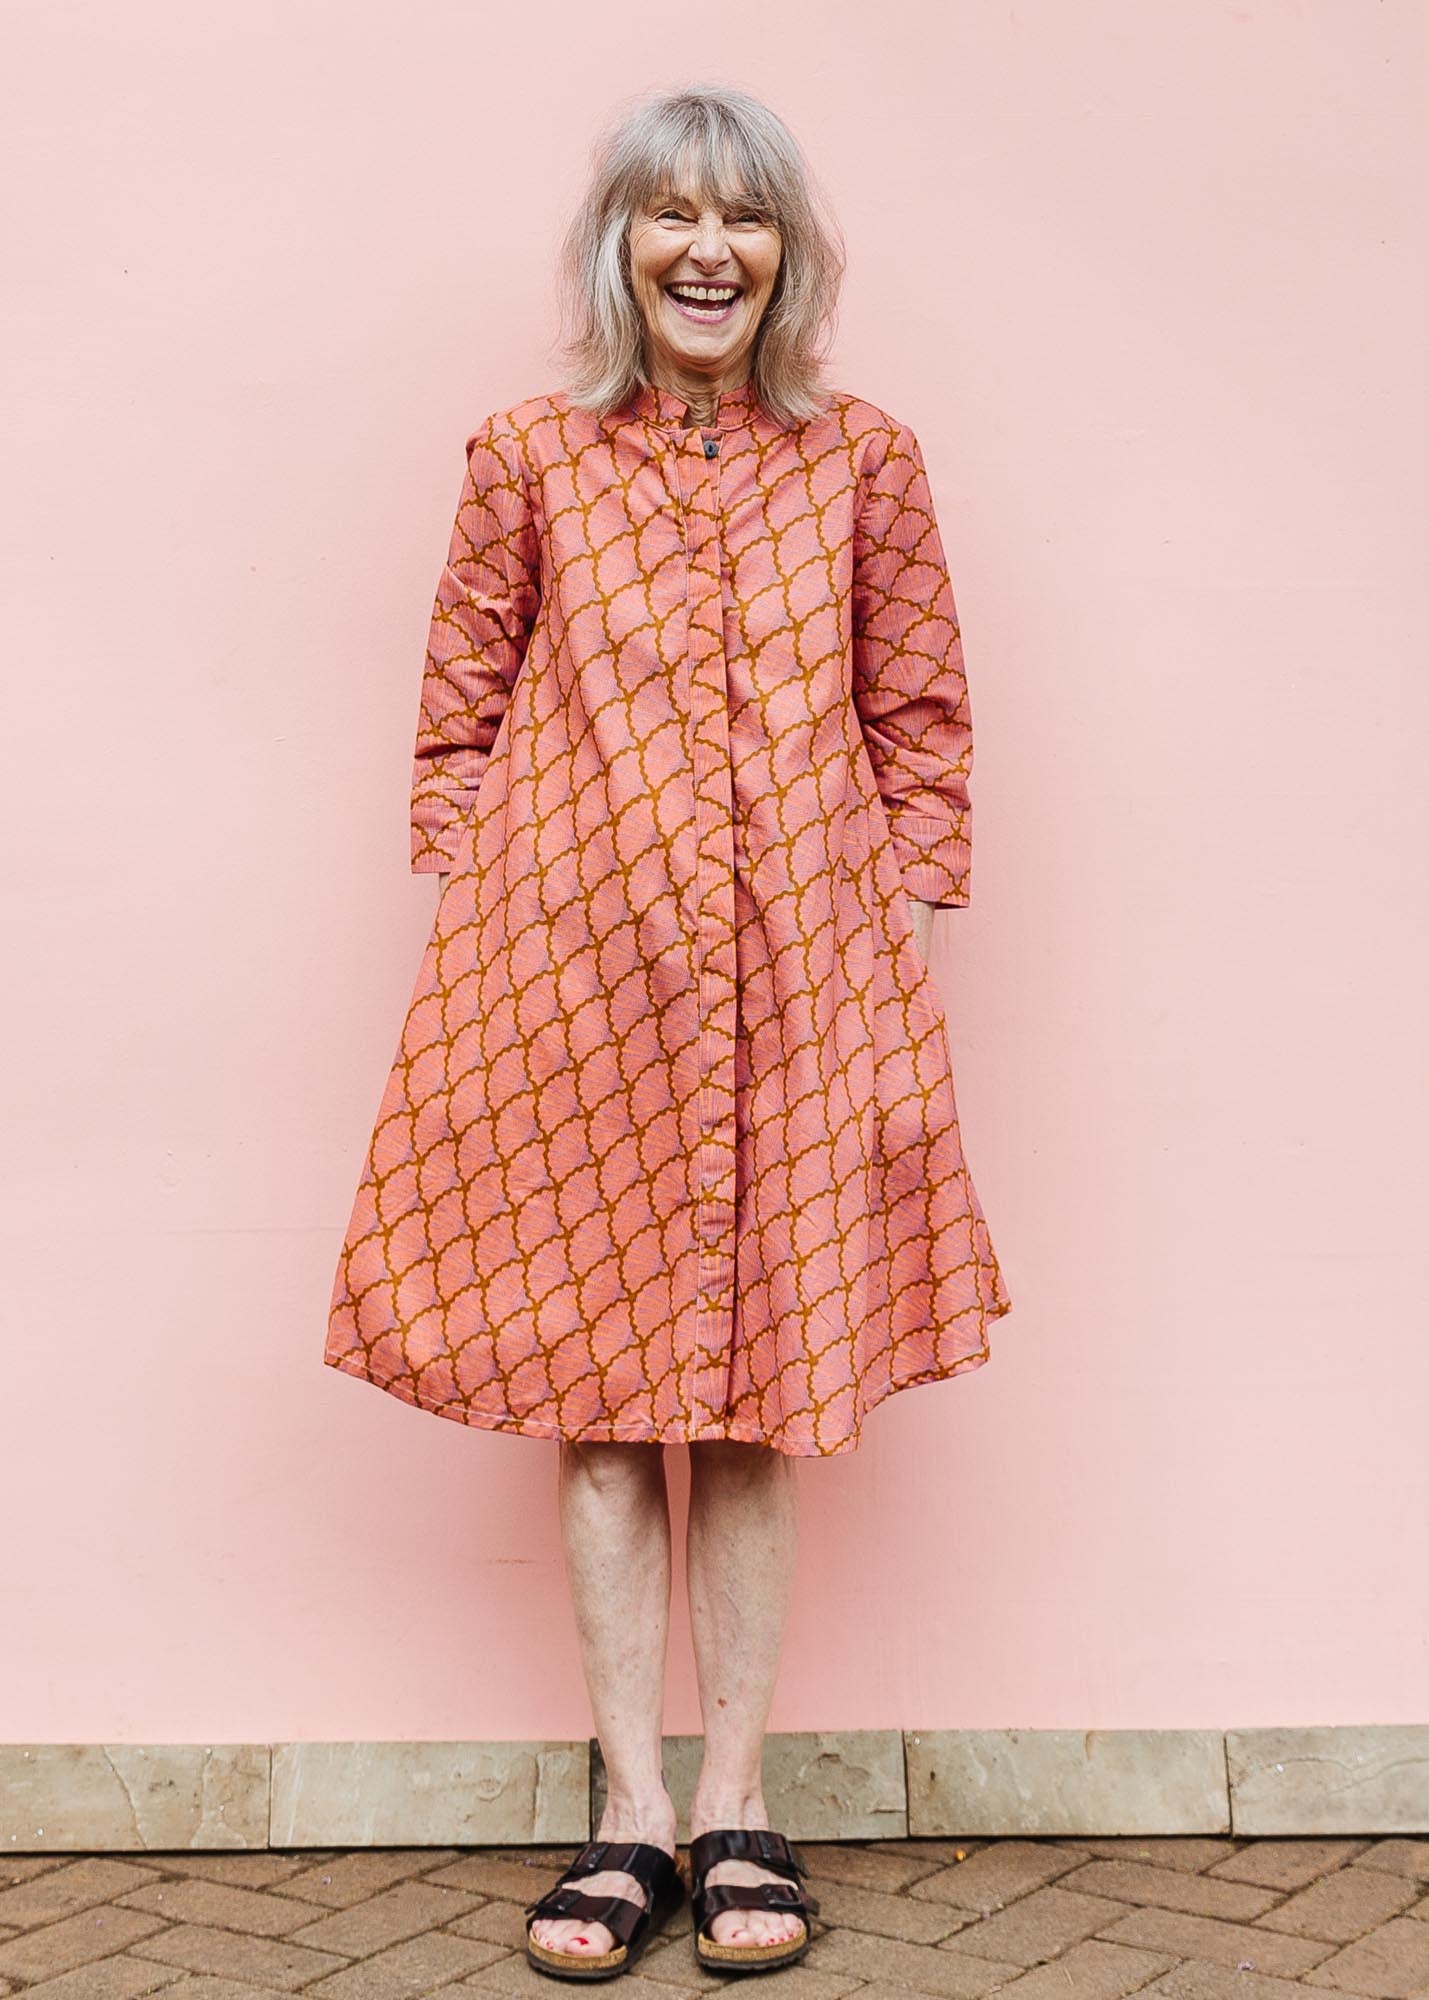 The model is wearing peach-pink, lavender and brown seashell print dress